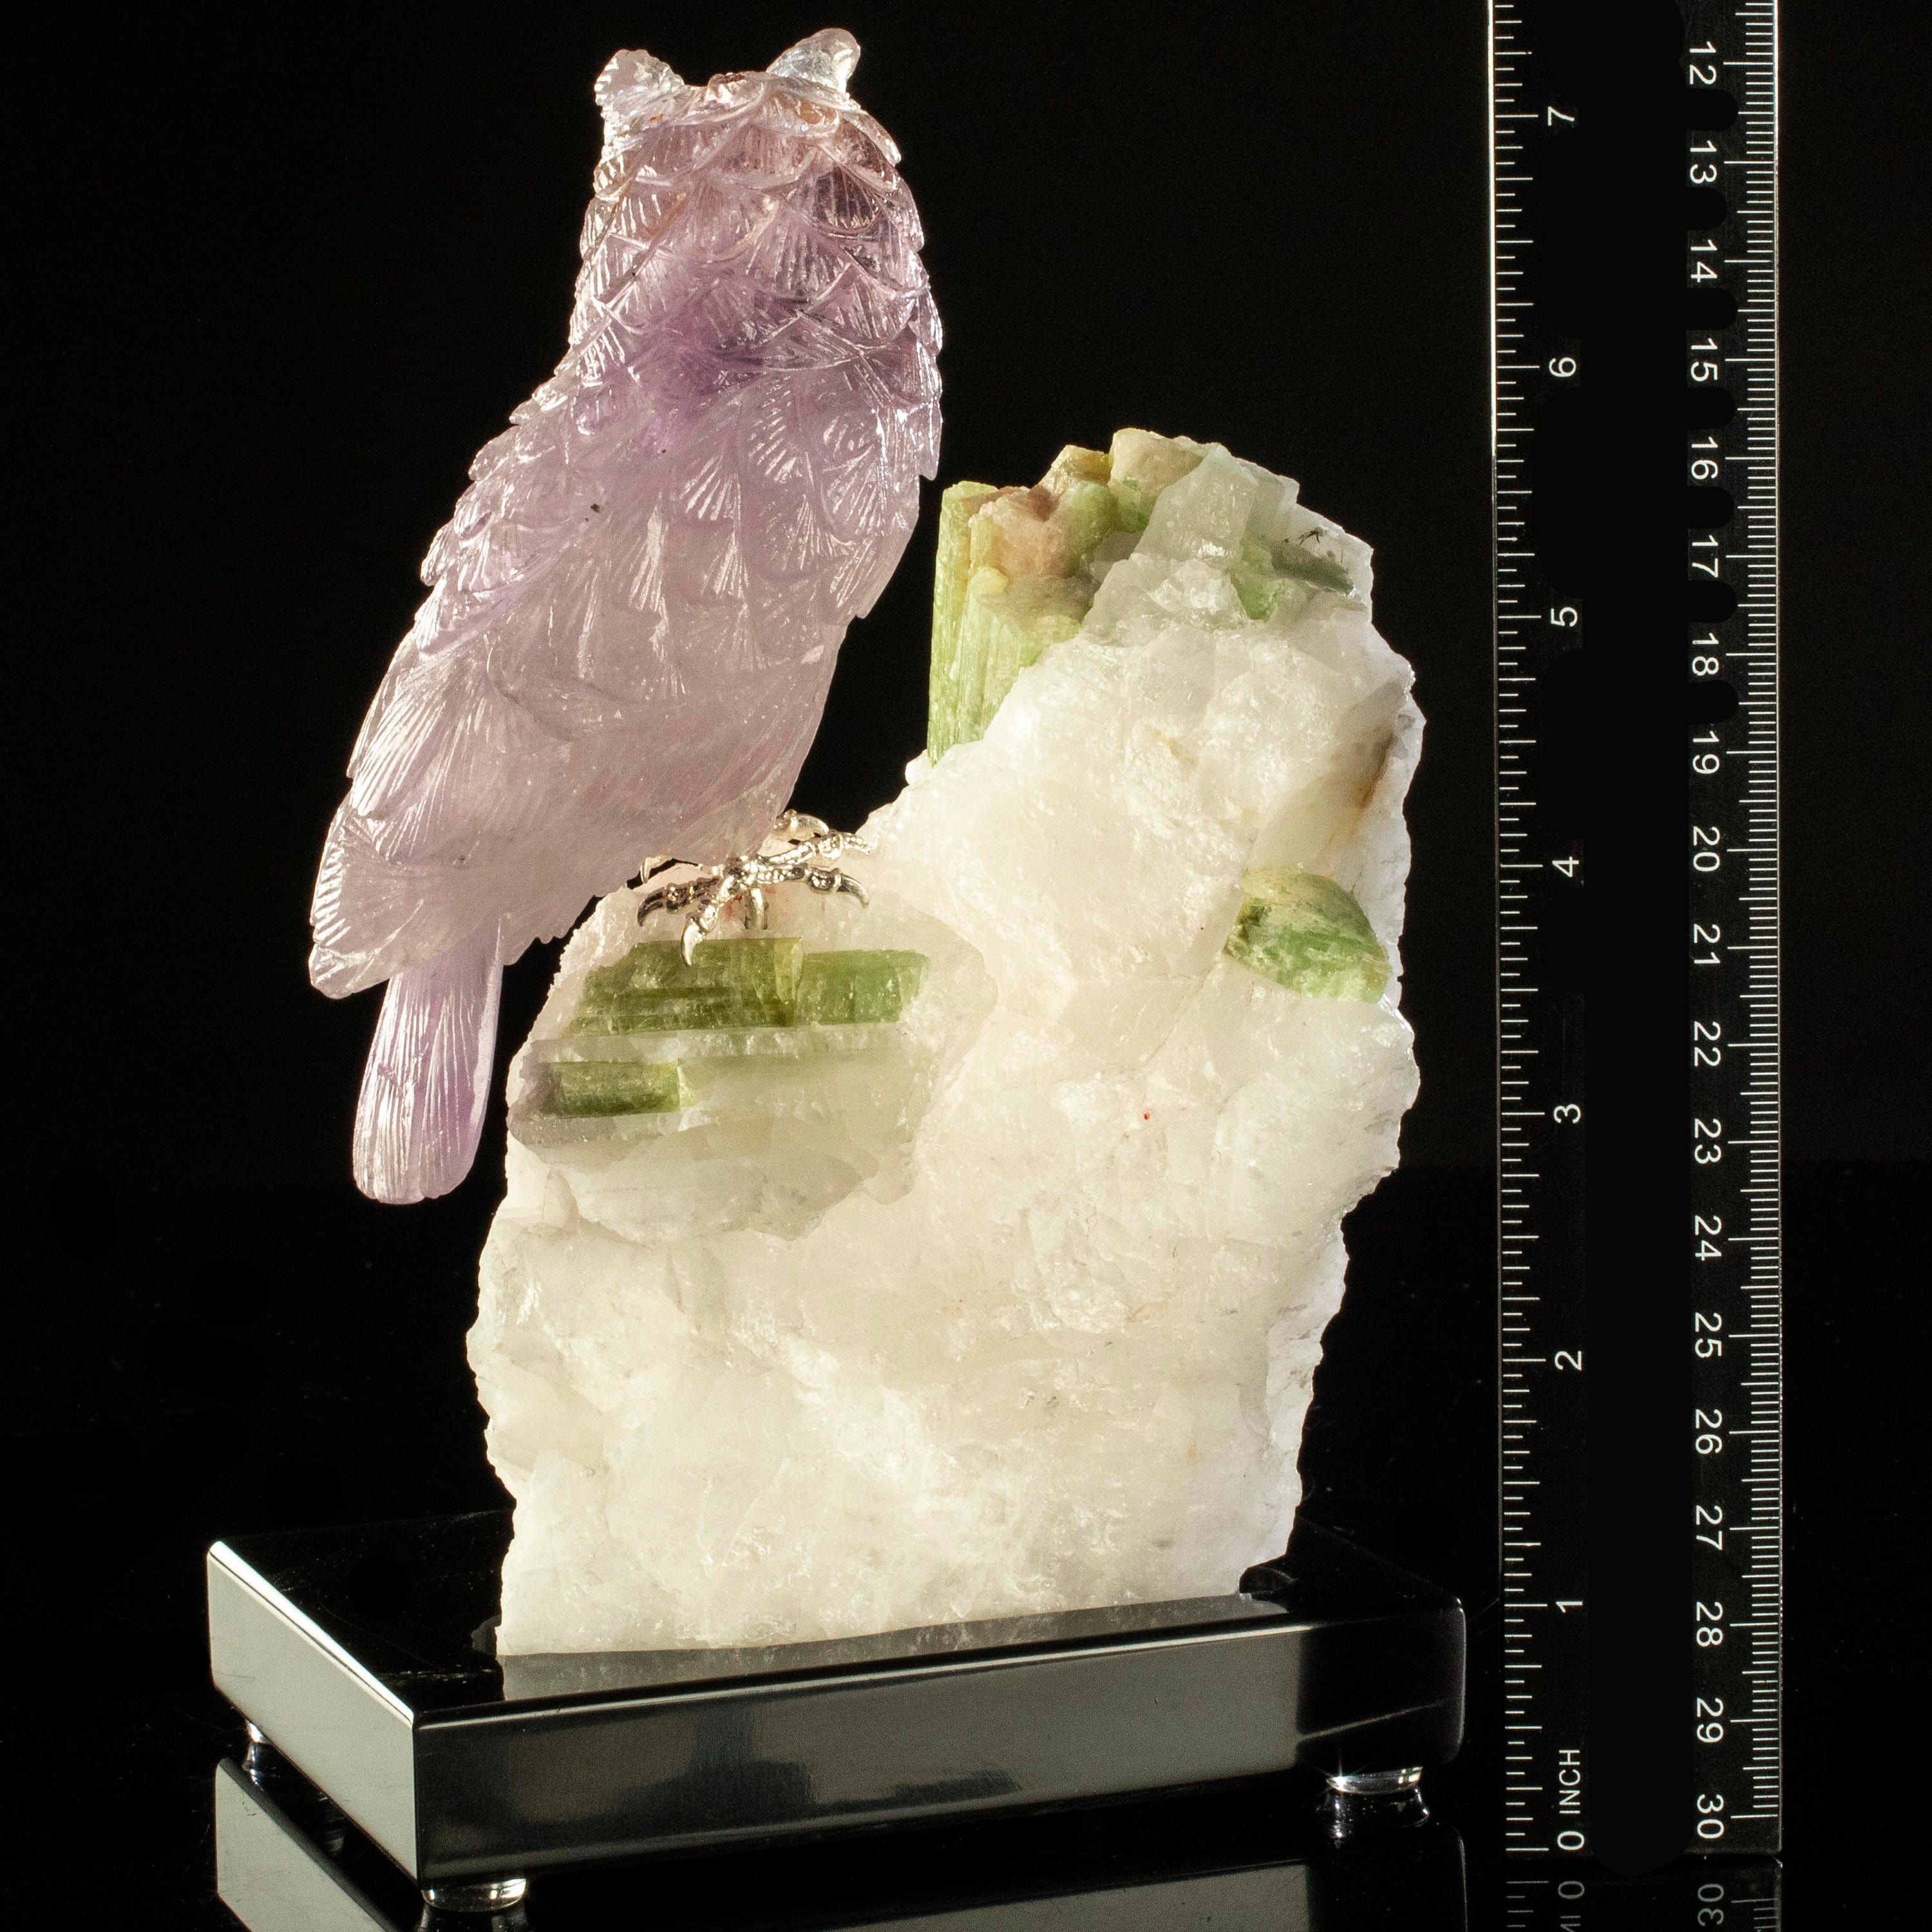 Kalifano Love Birds Carvings Amethyst Owl Love Birds Carving on Tourmaline Base LB.A103.001